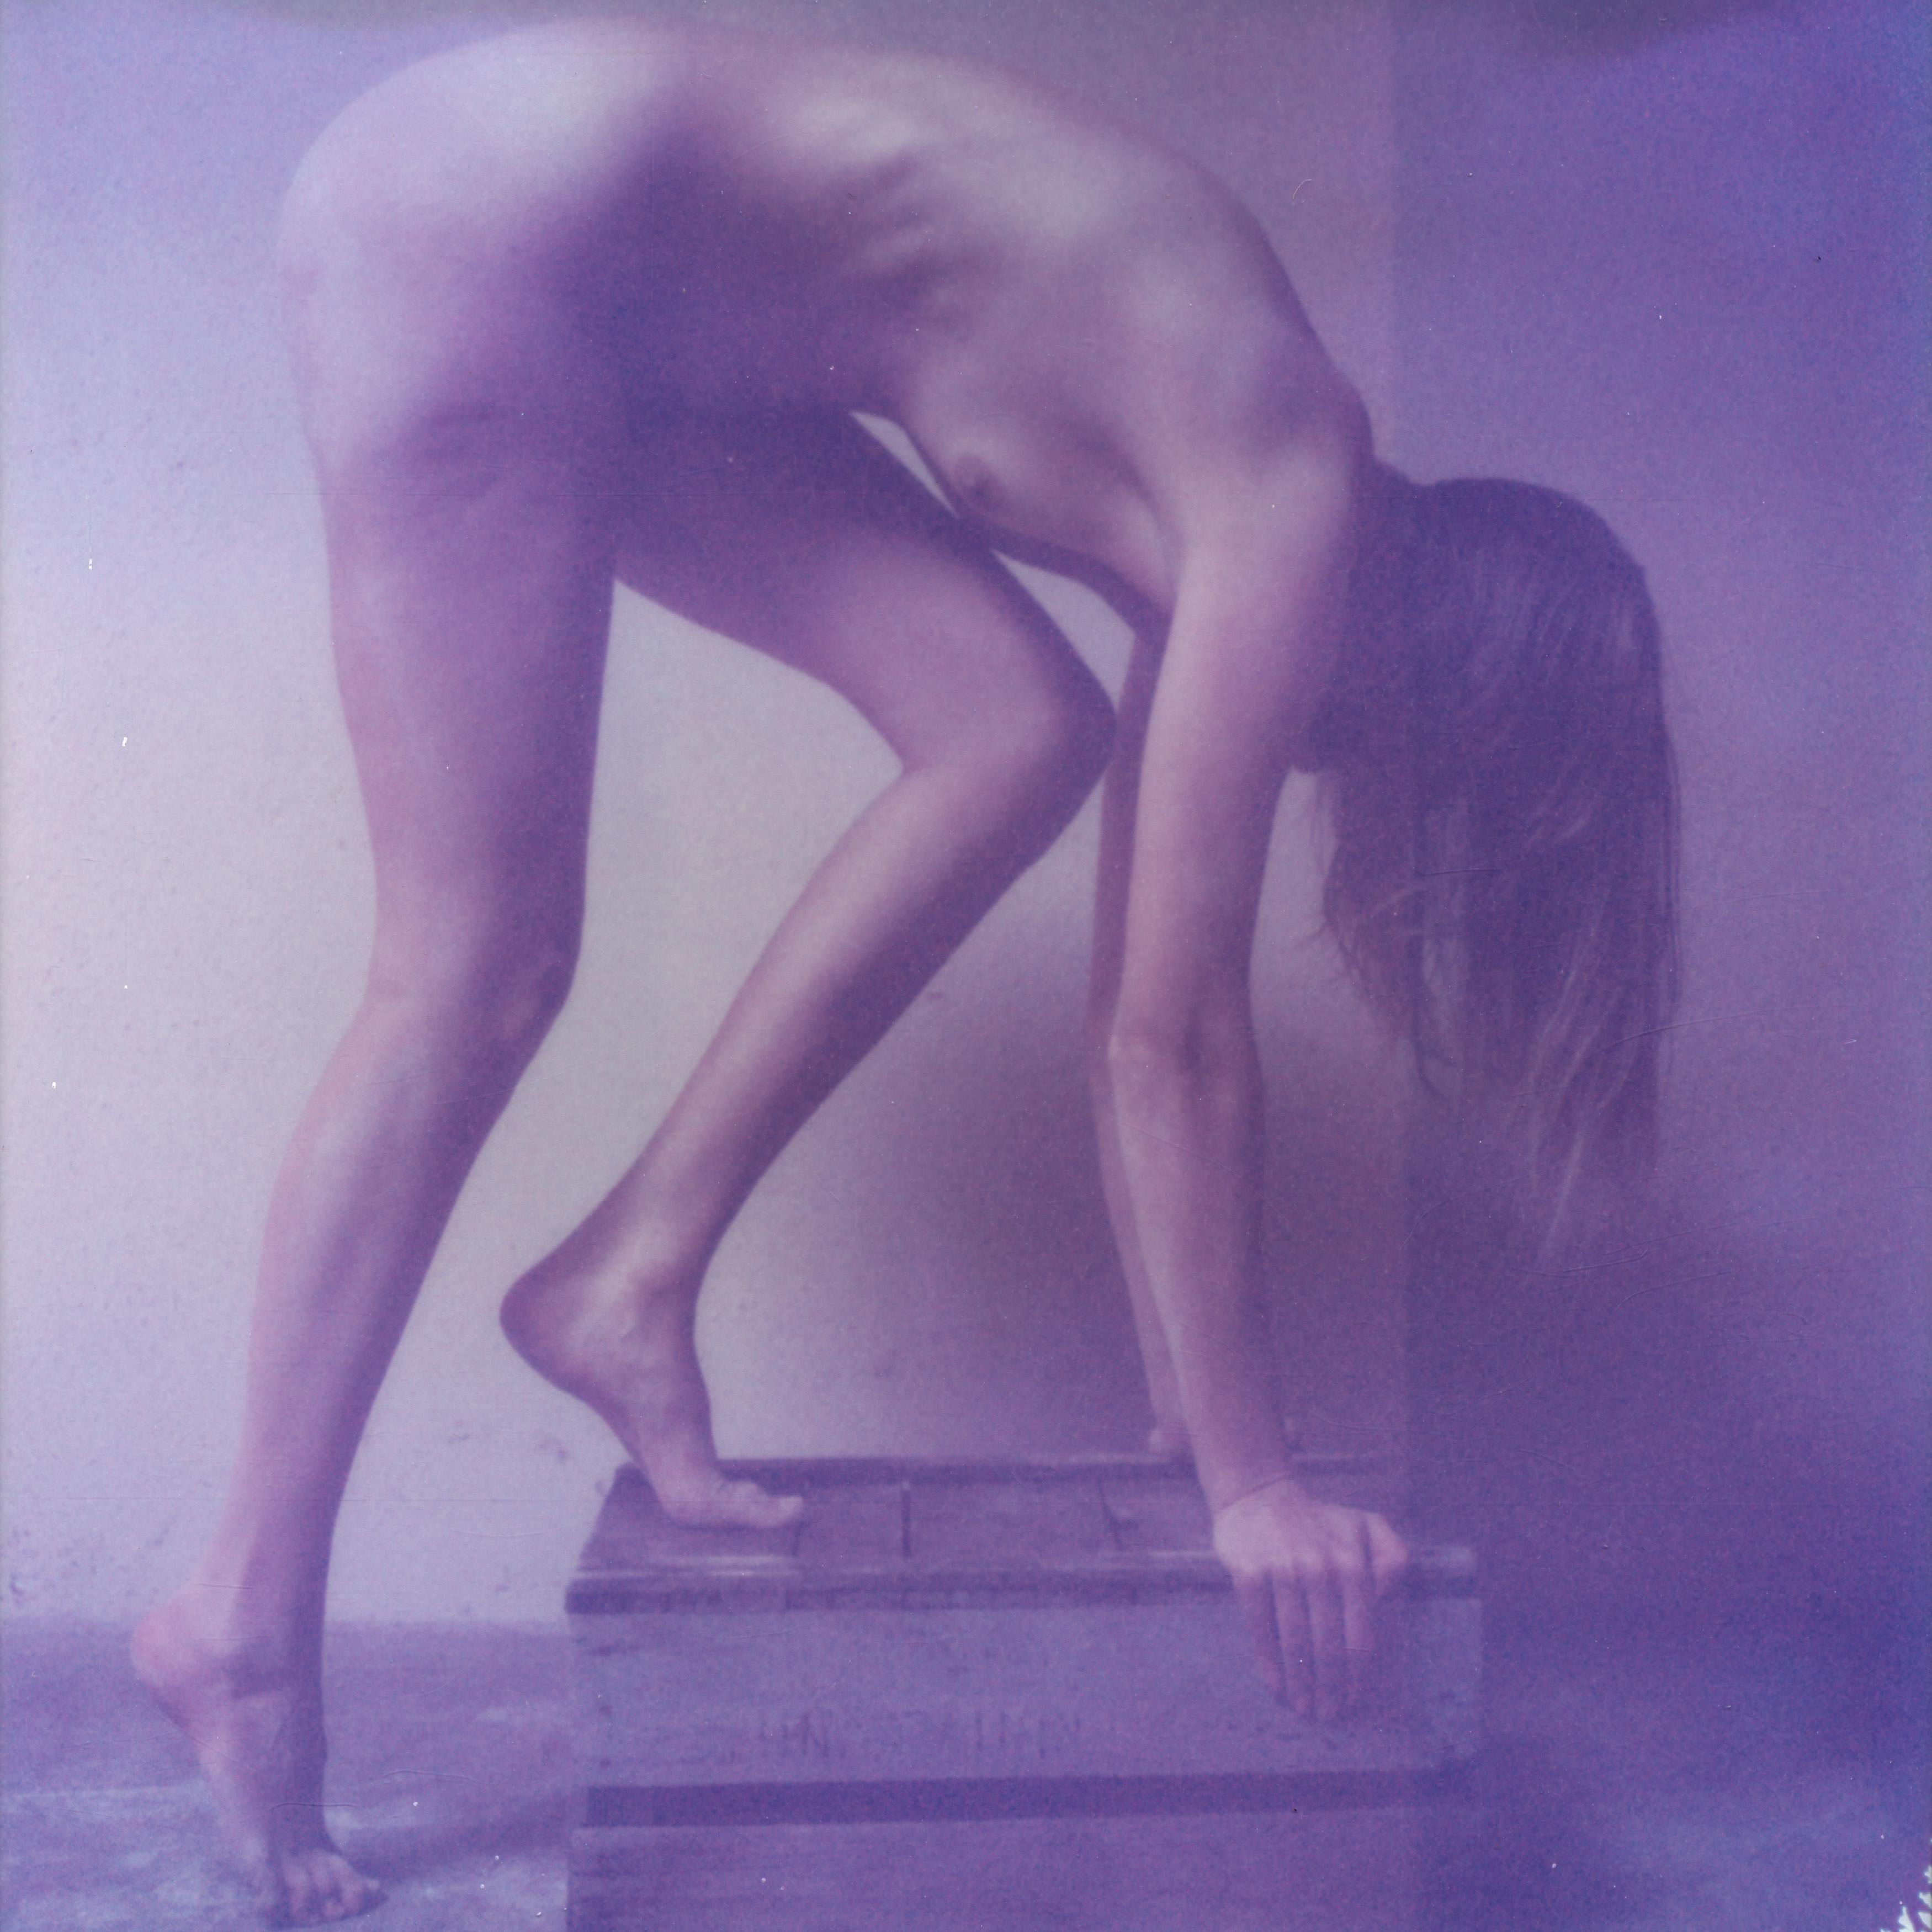 Kirsten Thys van den Audenaerde Color Photograph - Get up, stand up (get up for your rights) - Polaroid, Color, Women, 21st Century